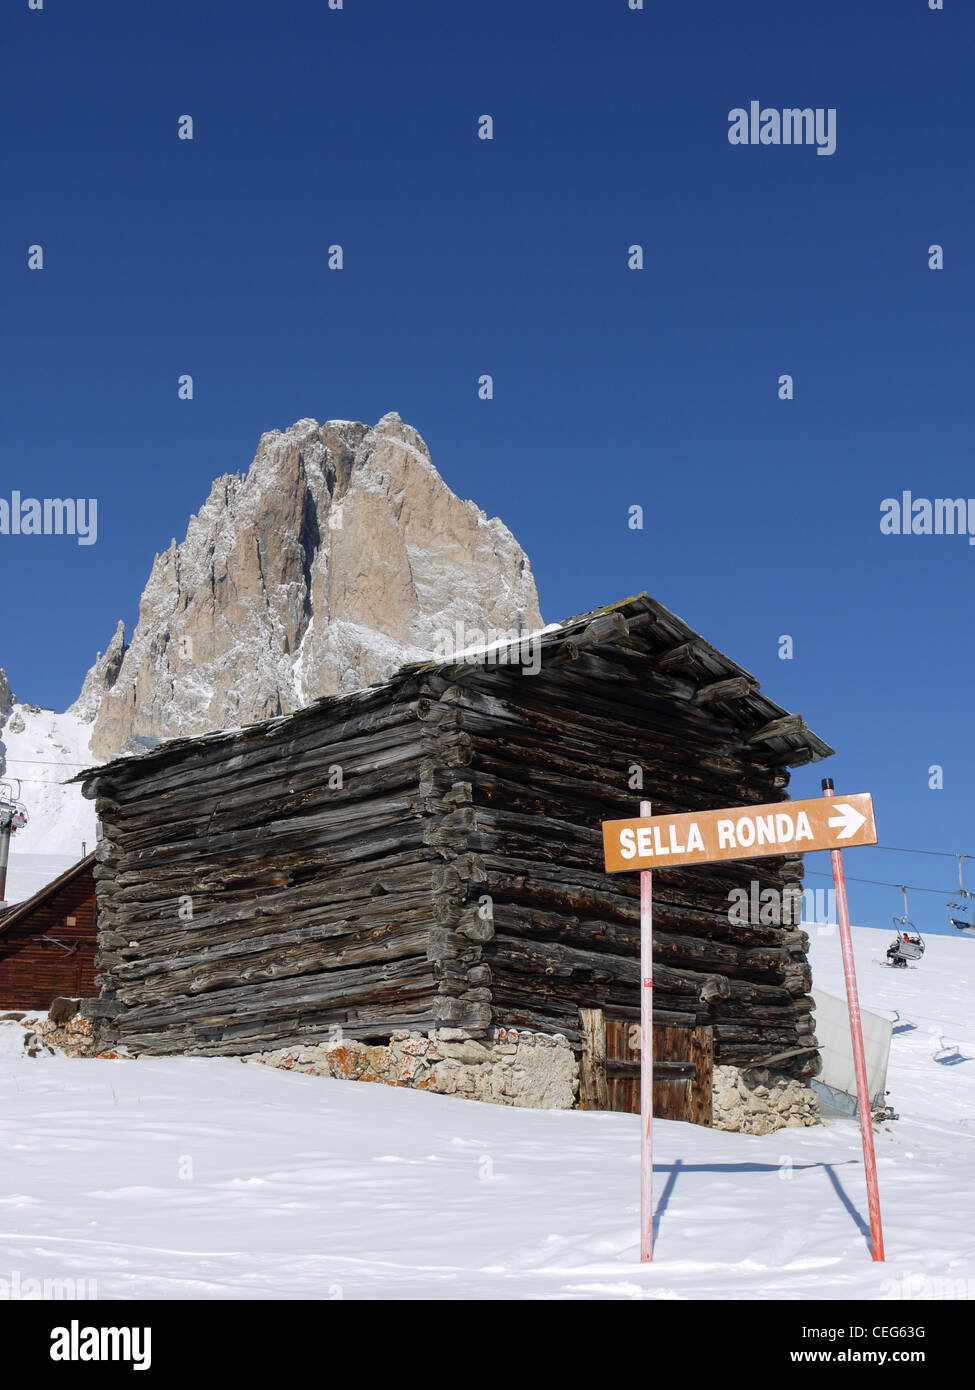 The Sellaronda is a ski route that loops around the massif of the Sella mountain range, of the Dolomites in Italy. Stock Photo